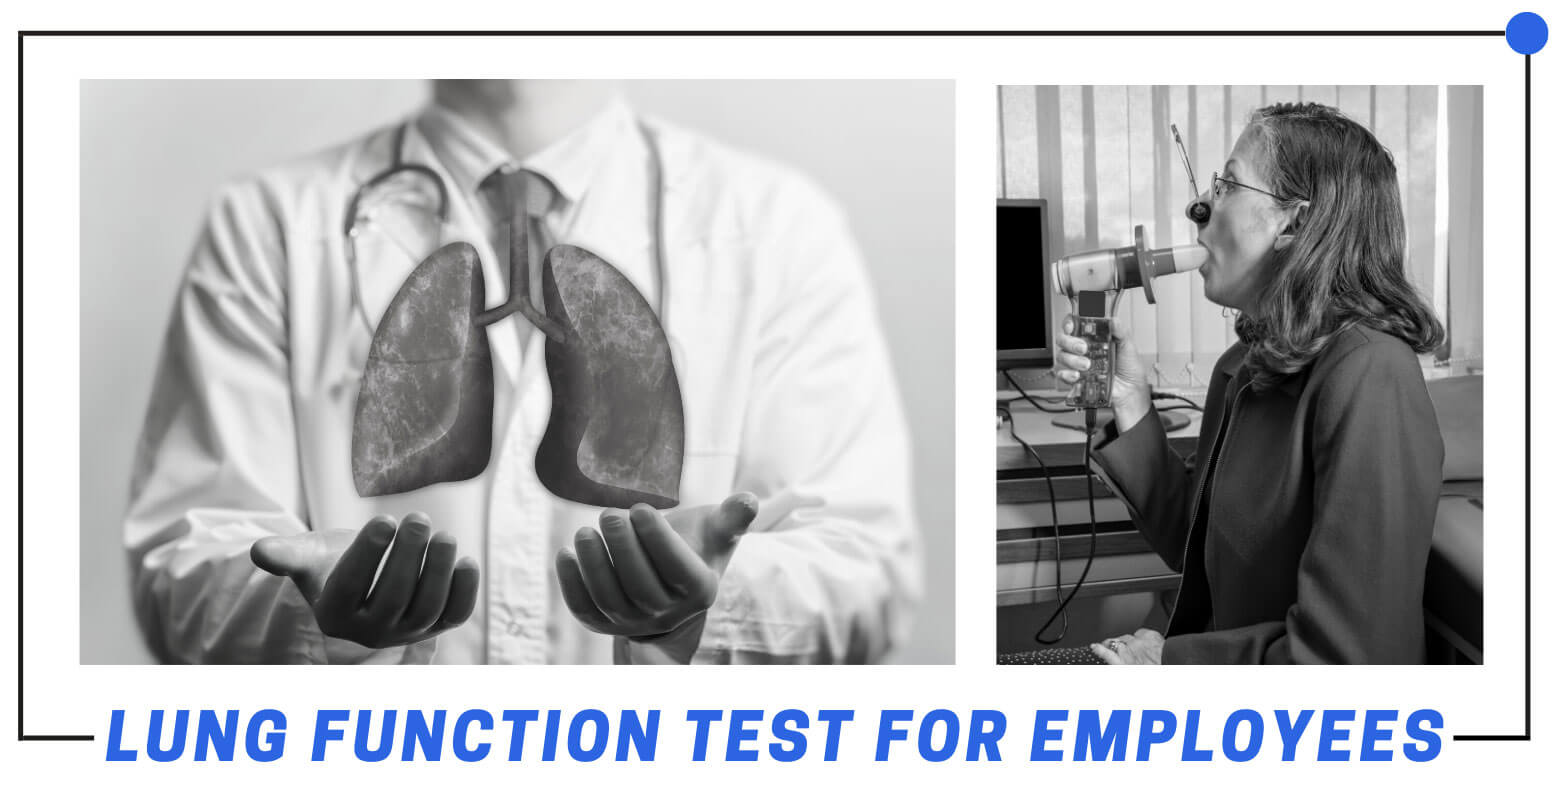 Lung-Function-Test-for-Employees-+-Mobile-Clinic-Test-Booth